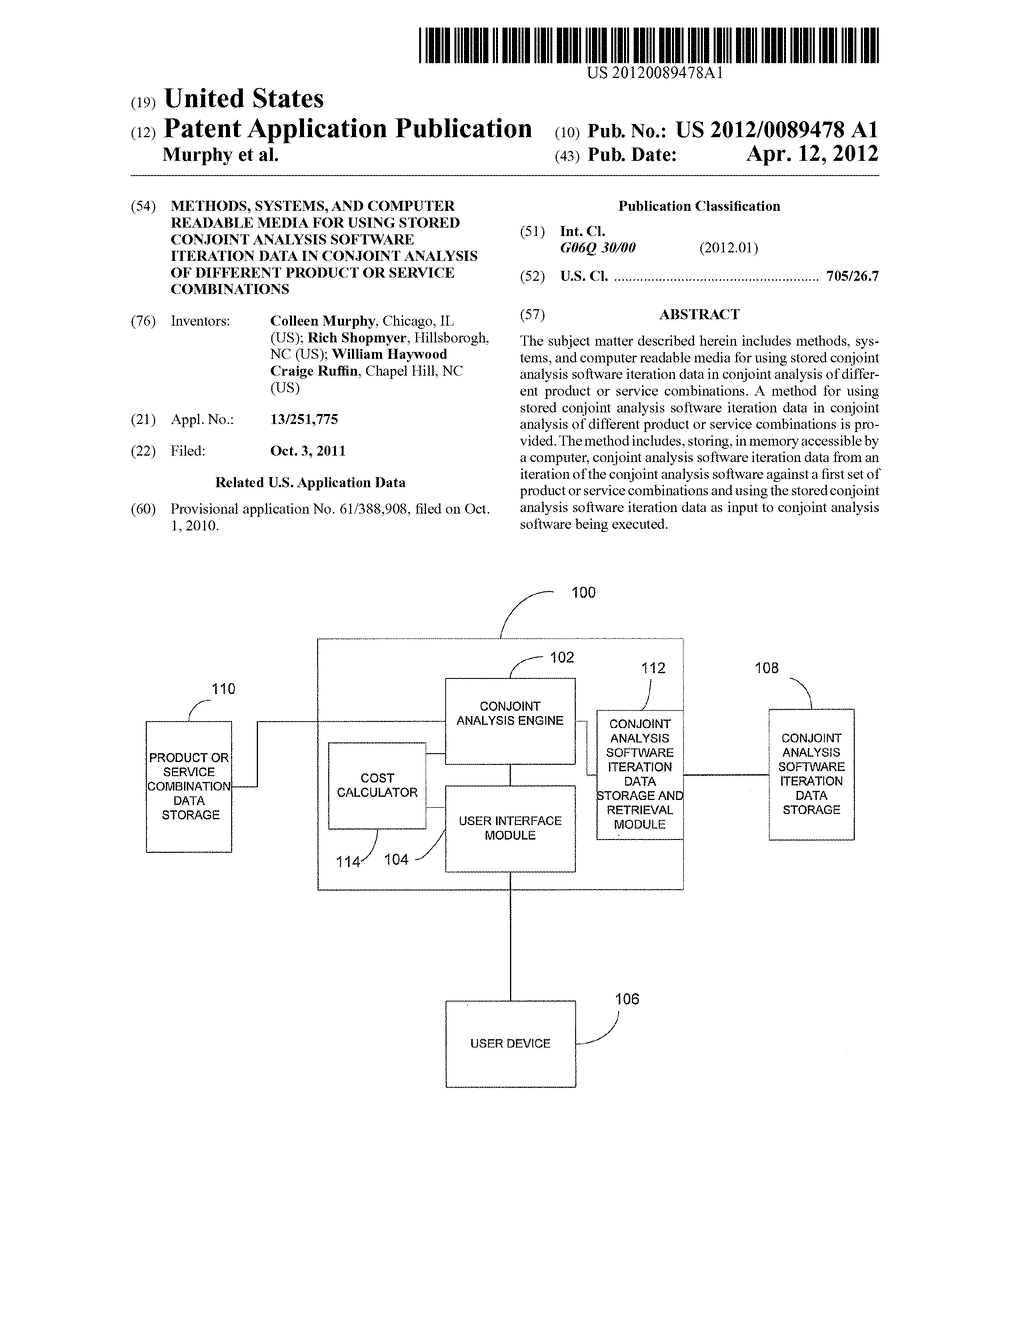 METHODS, SYSTEMS, AND COMPUTER READABLE MEDIA FOR USING STORED CONJOINT     ANALYSIS SOFTWARE ITERATION DATA IN CONJOINT ANALYSIS OF DIFFERENT     PRODUCT OR SERVICE COMBINATIONS - diagram, schematic, and image 01